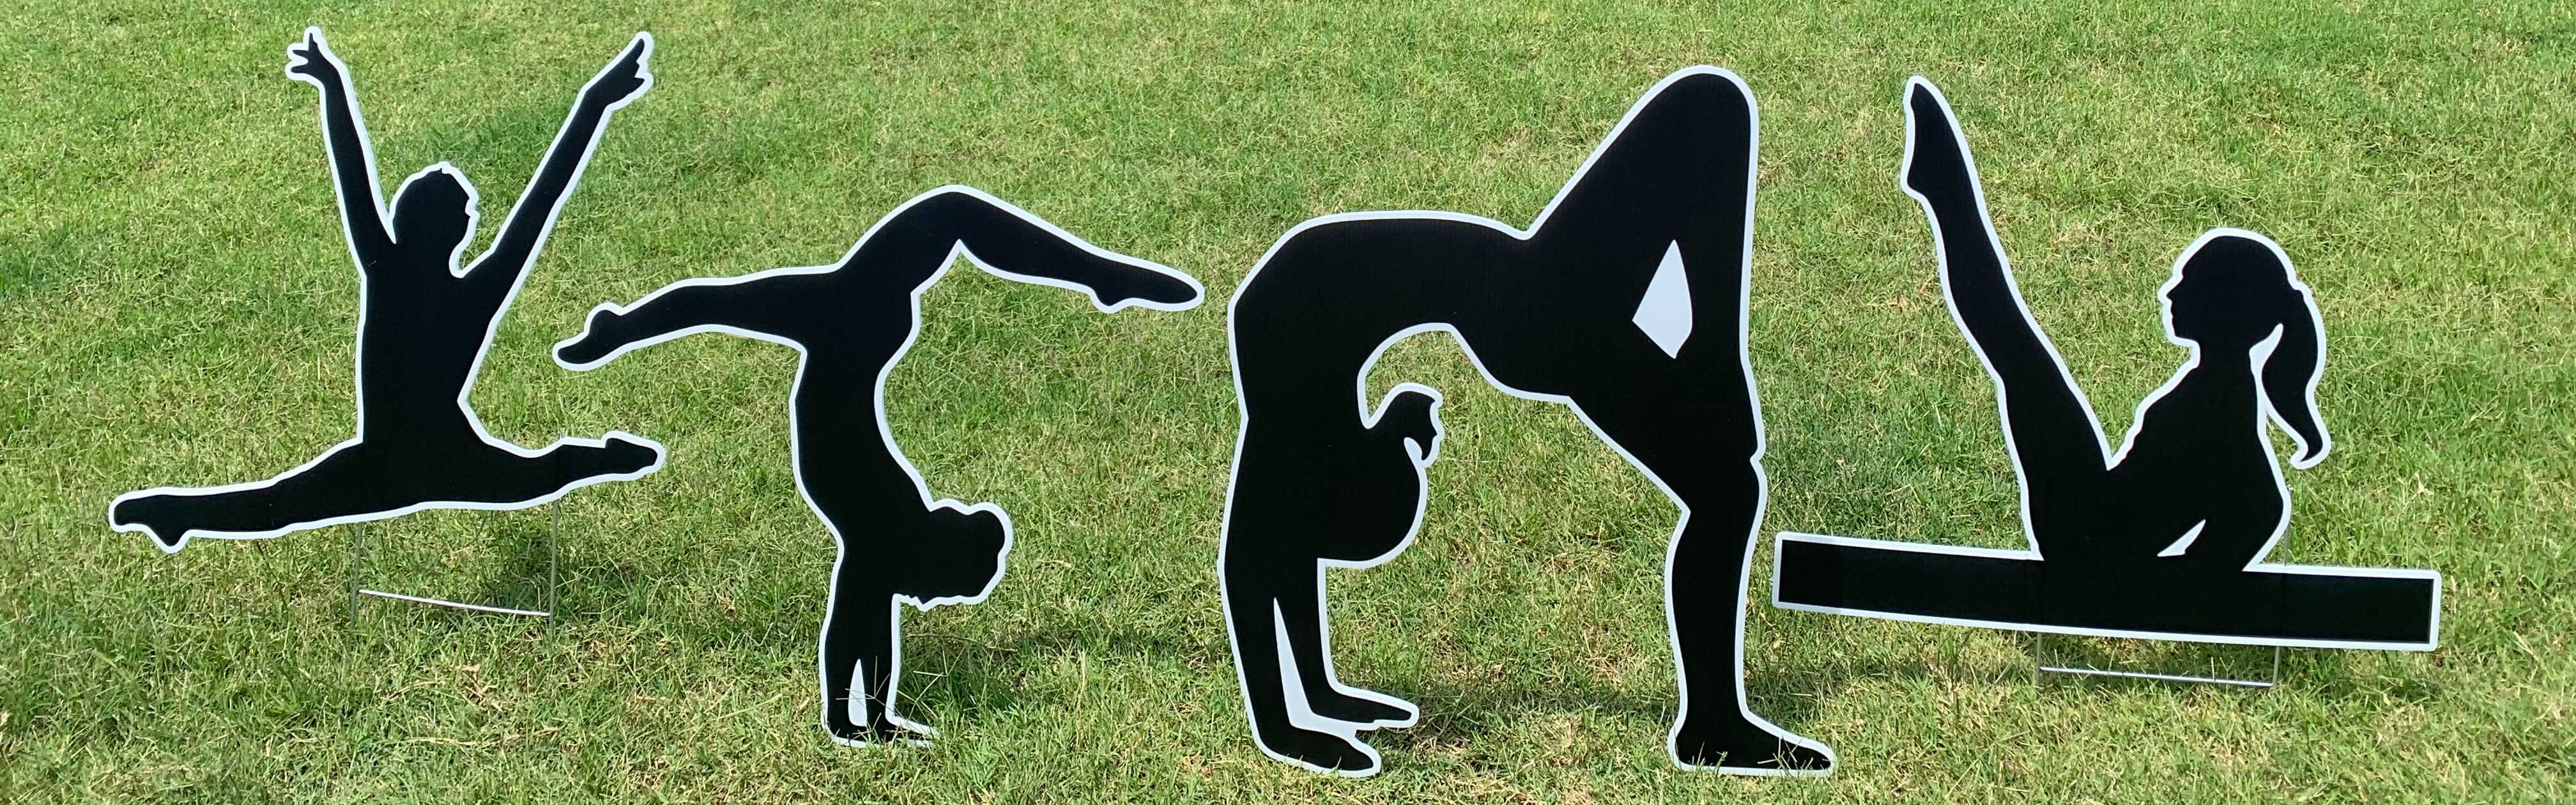 Yard card sign collection silhouette gymnastics 